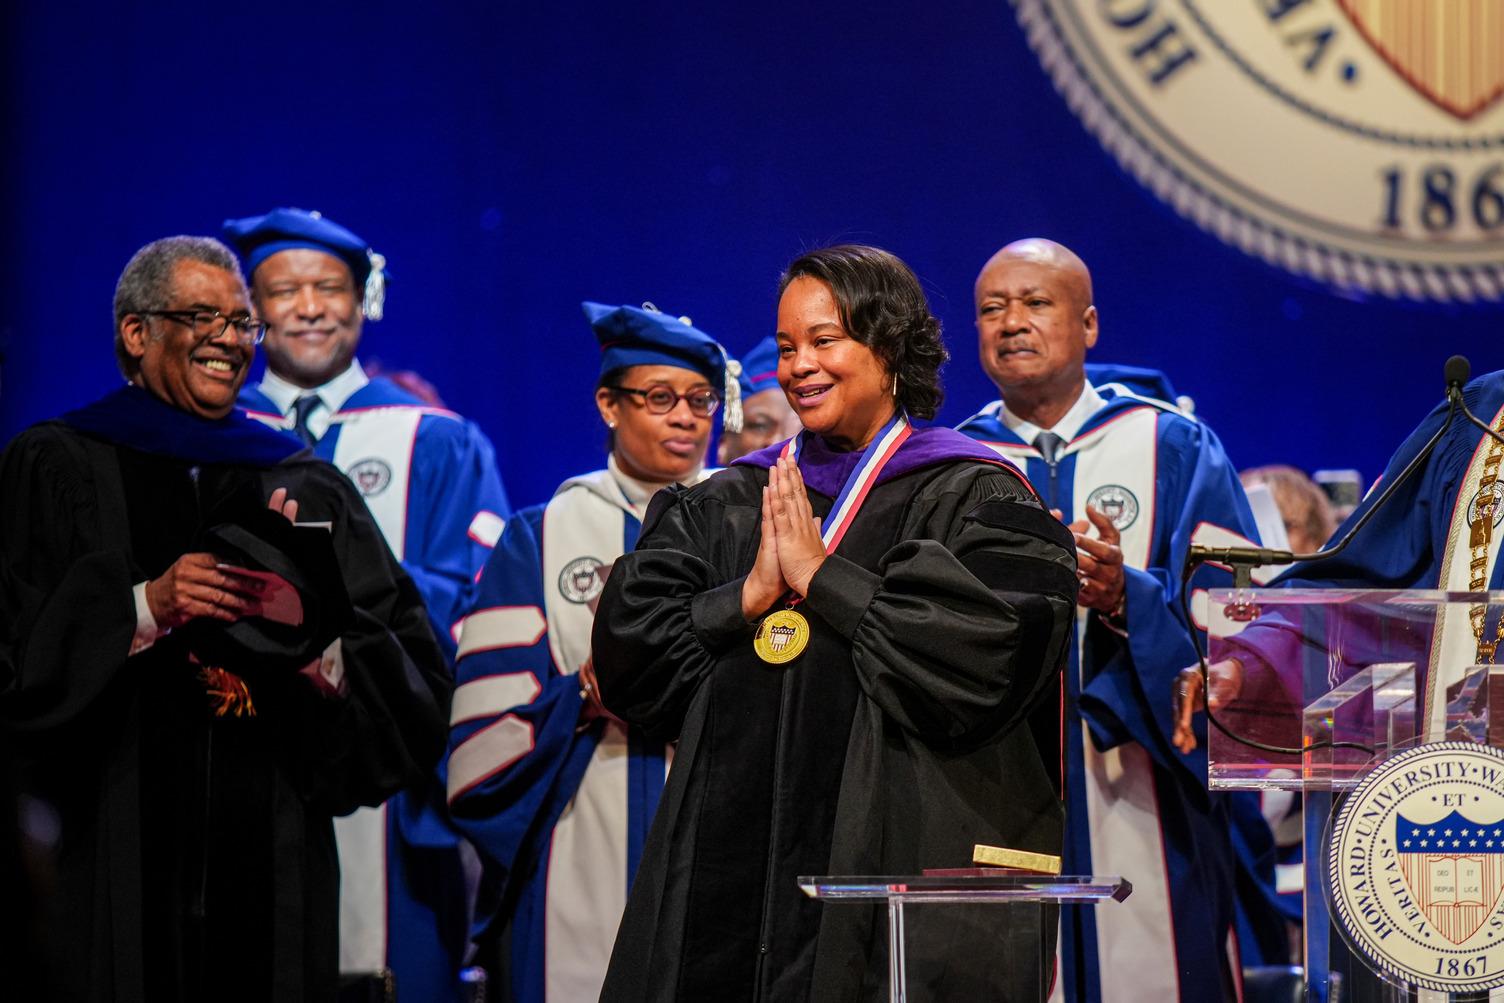 Howard School of Law Dean Danielle R. Holley takes in the standing ovation and her surprise reception of the Presidential Medal Award, which lauds members of the Howard community who embody truth and service beyond their roles.